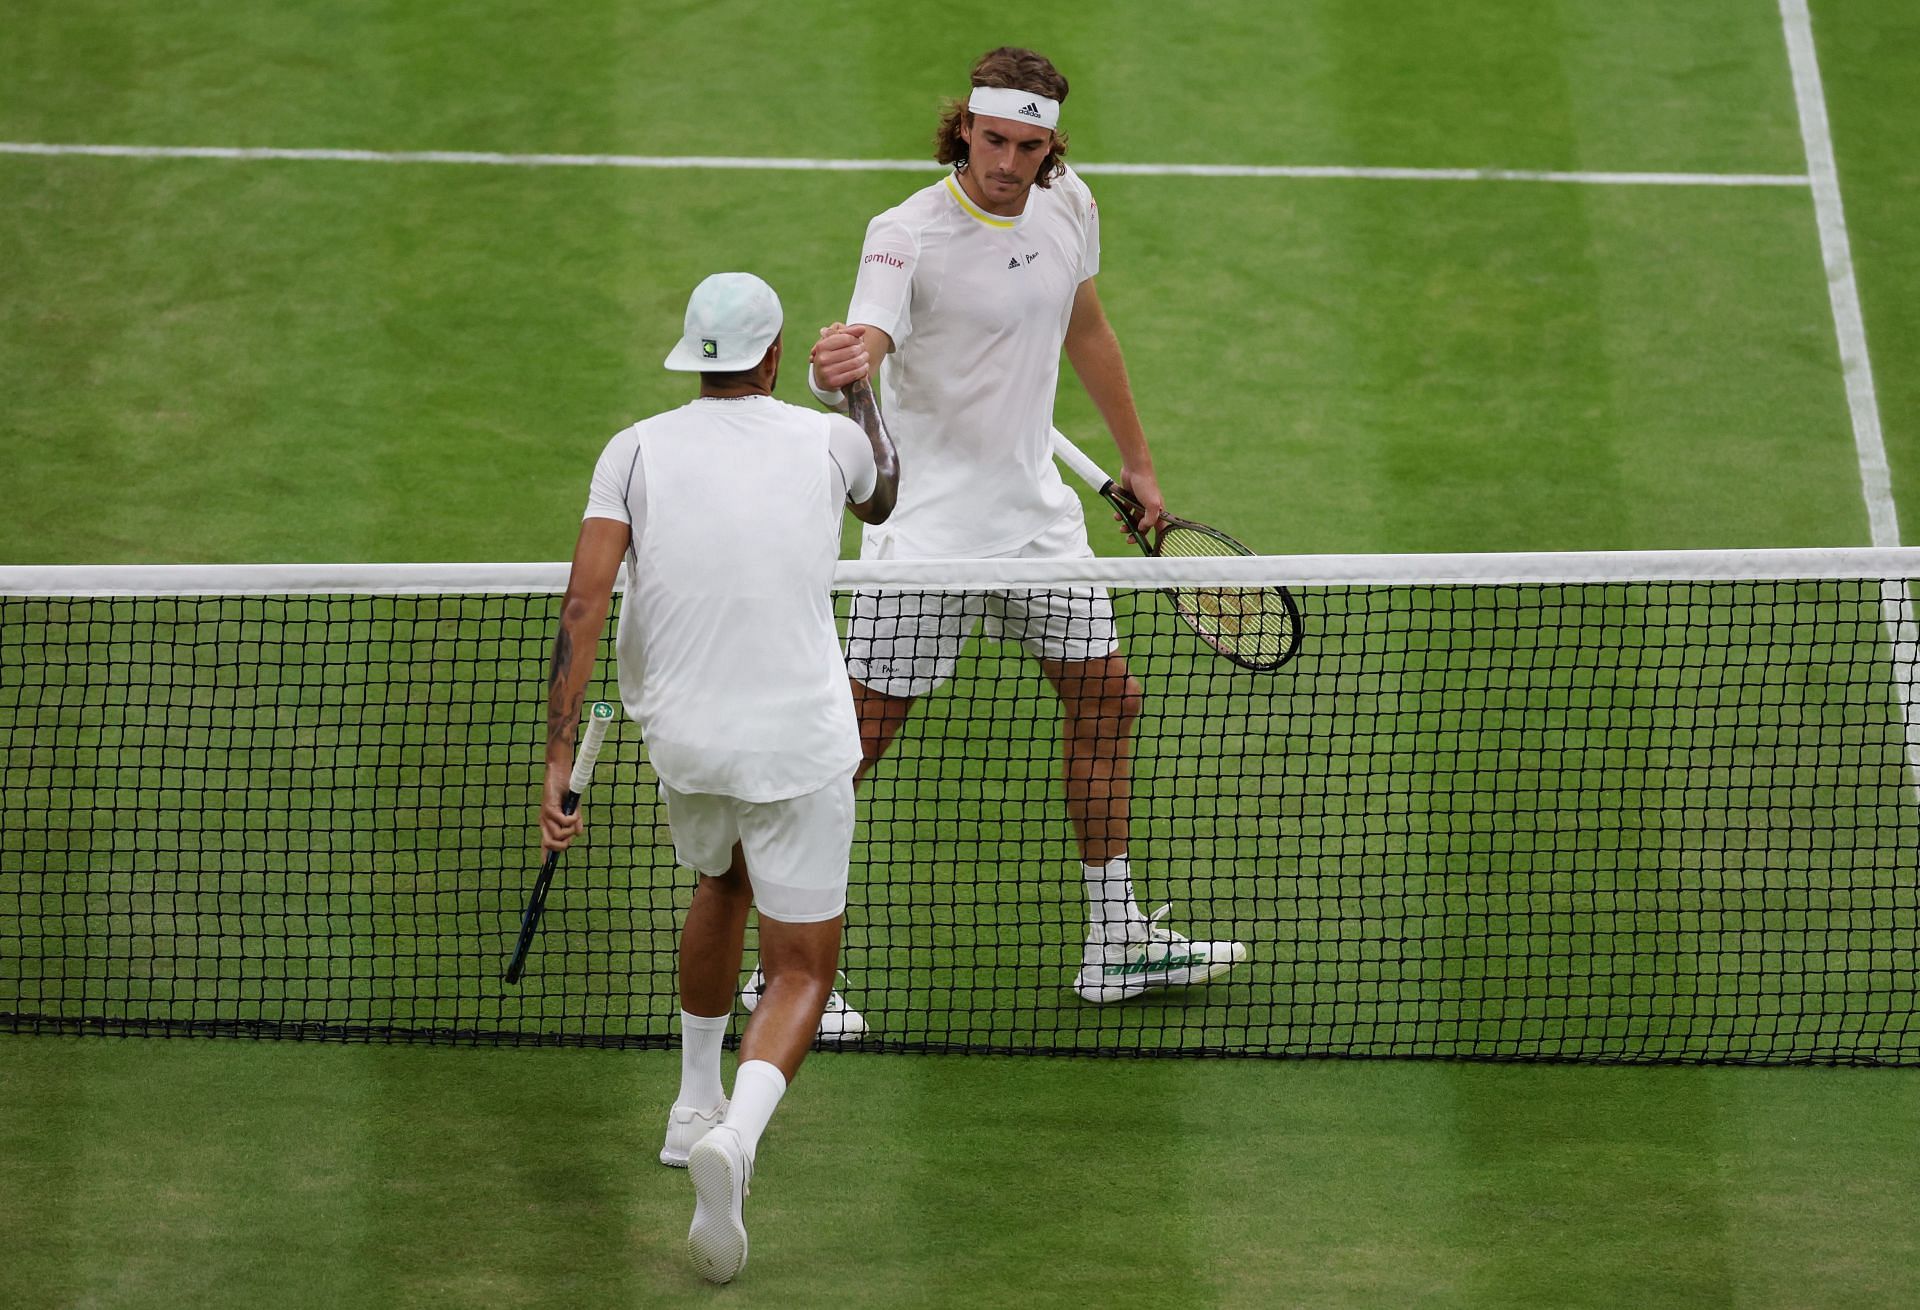 Nick Kyrgios interacts with Stefanos Tsitsipas after winning the Third Round match at Wimbledon 2022